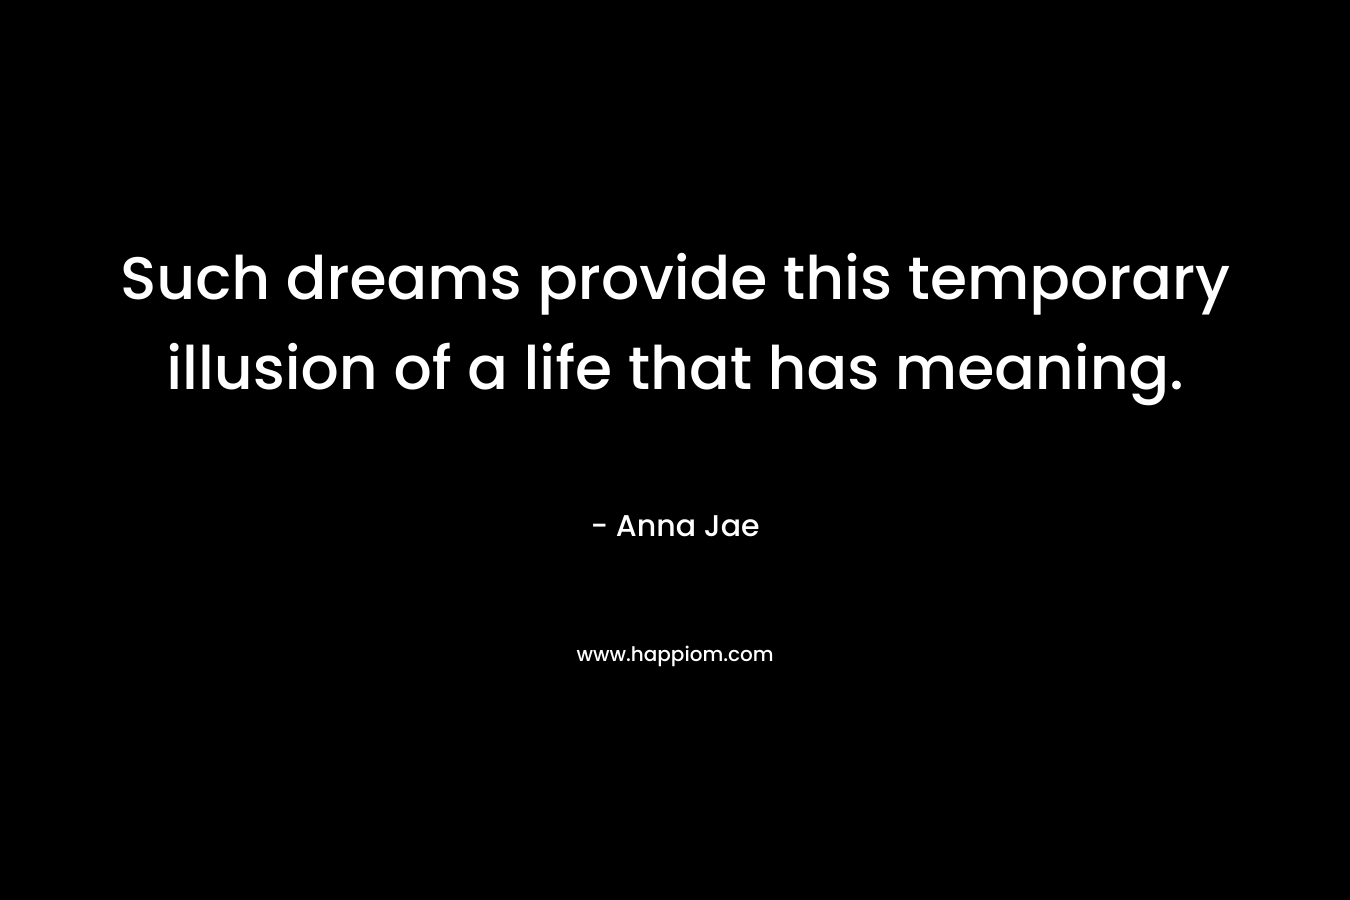 Such dreams provide this temporary illusion of a life that has meaning.